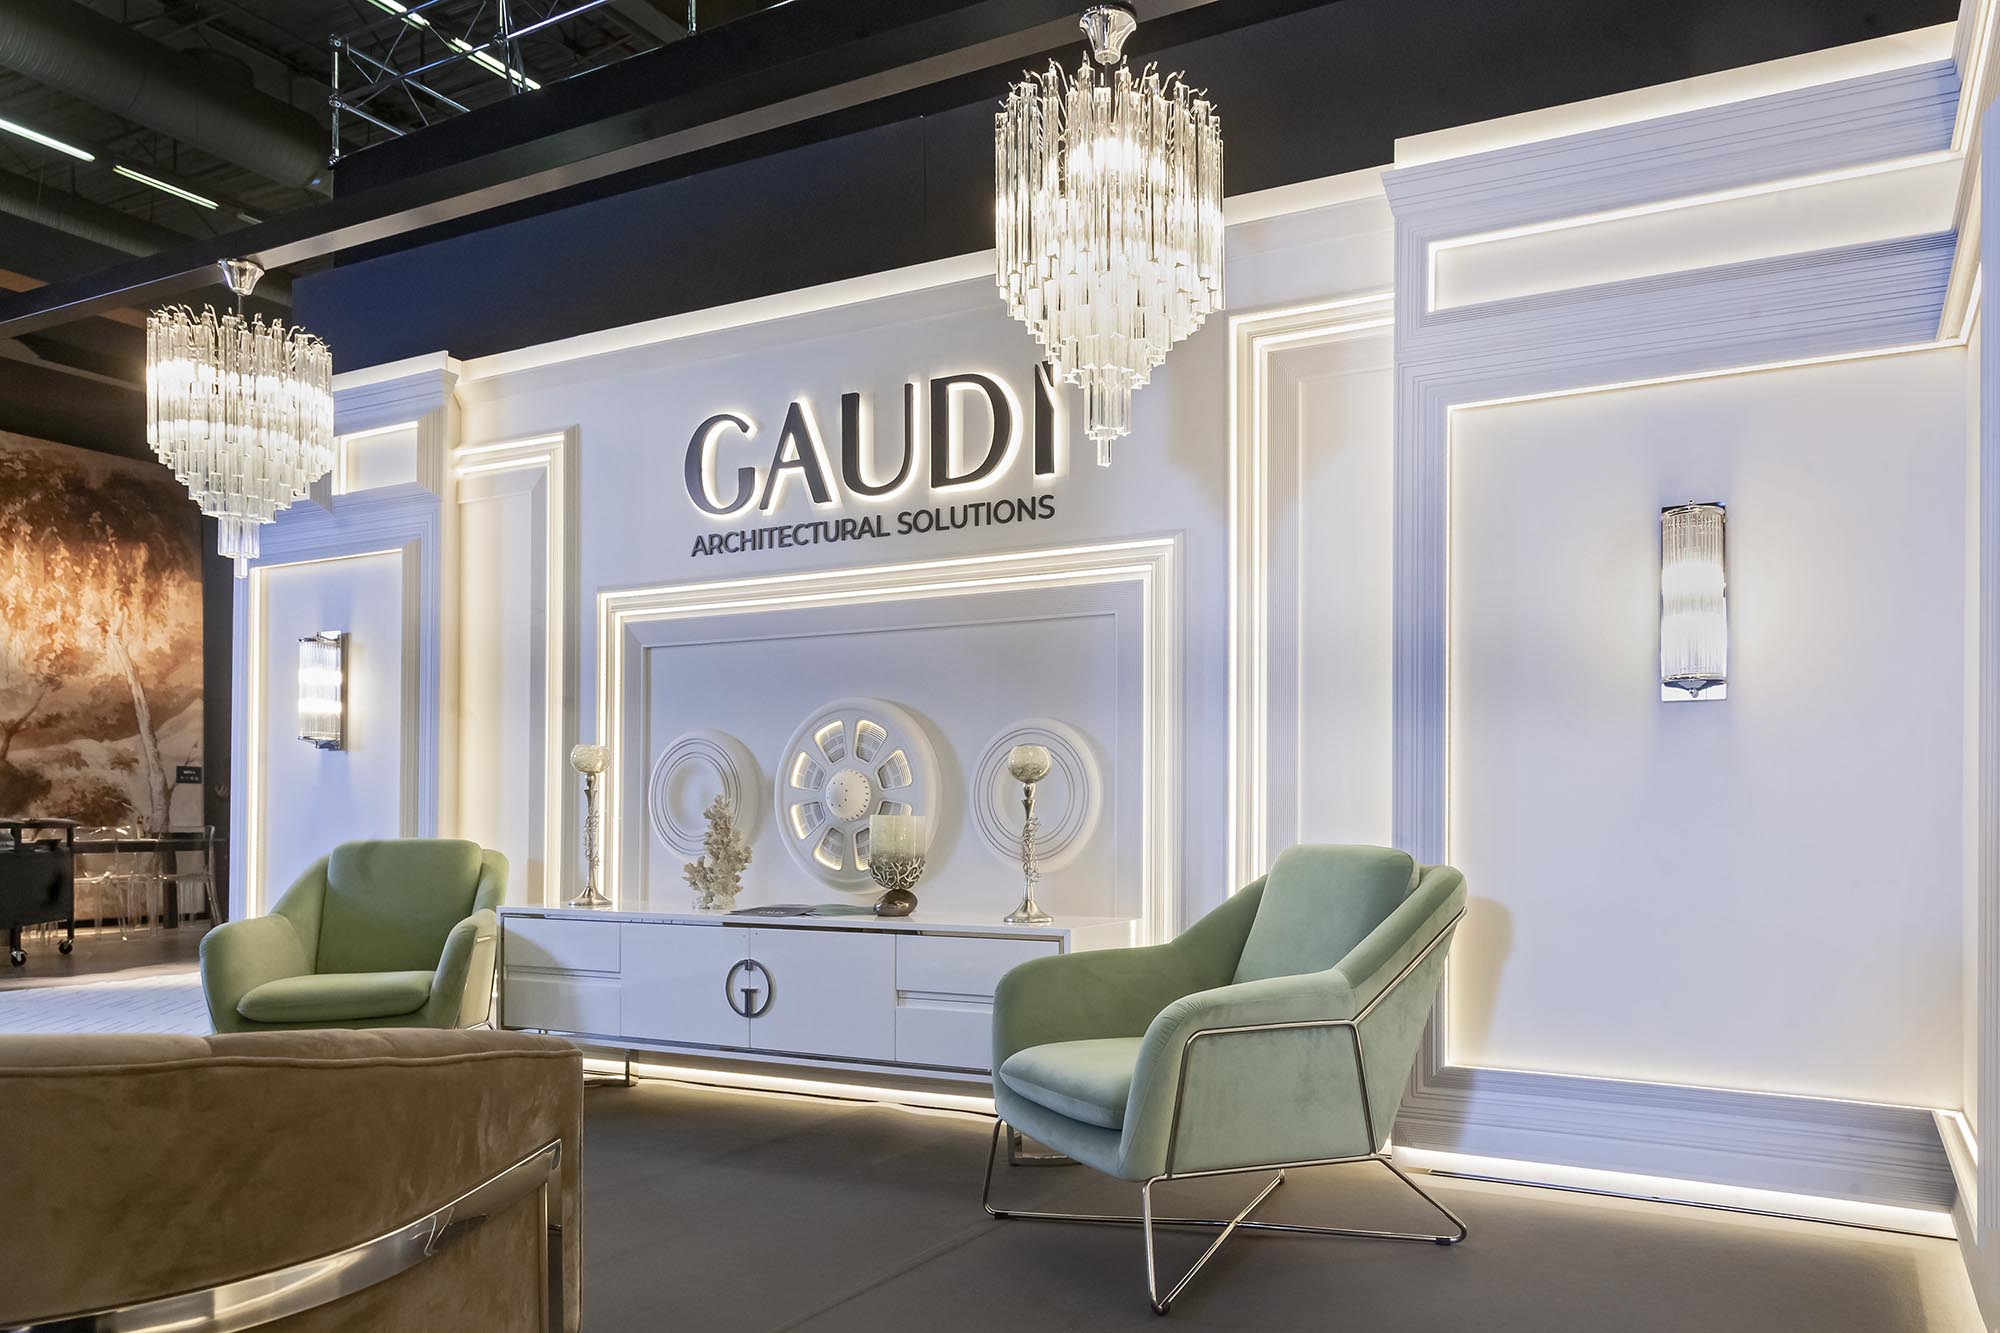 Gaudi brand at the Maison&Objet 2020 exhibition